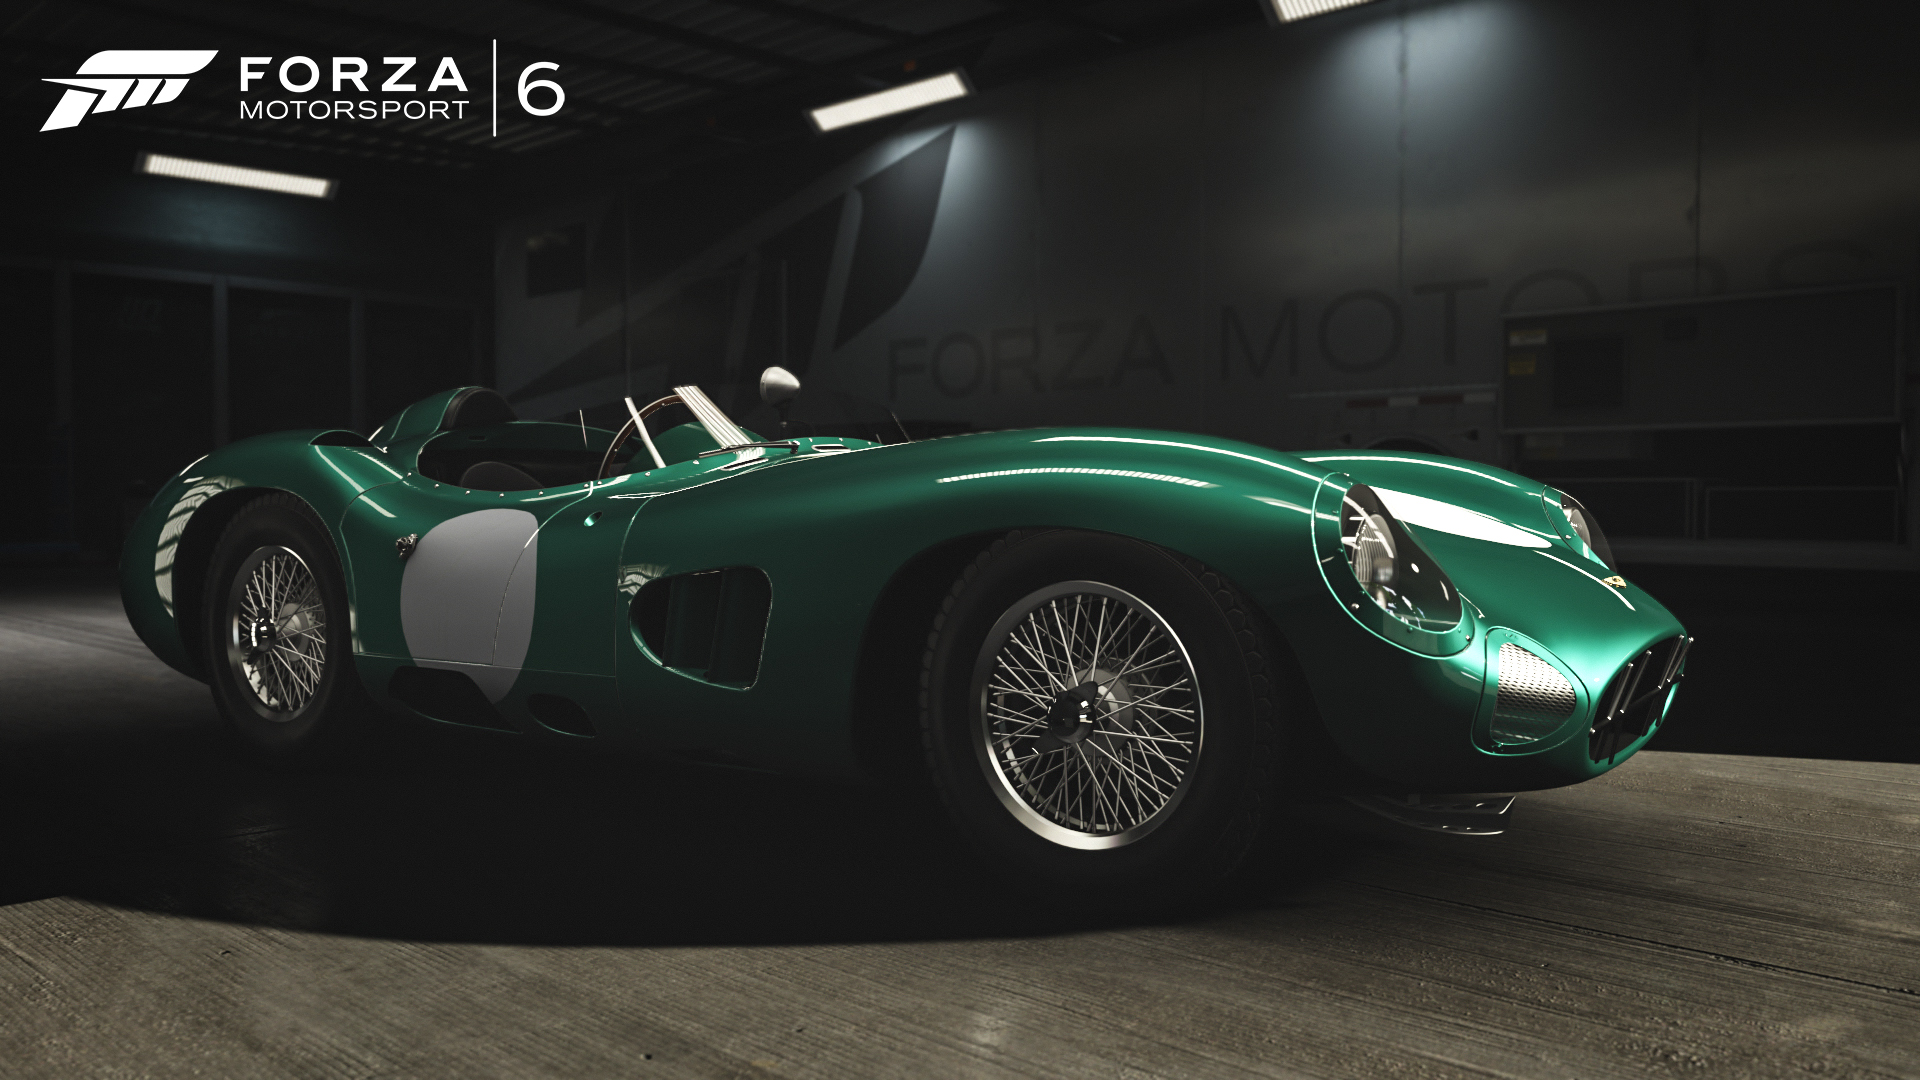 Forza Motorsport 6: Getting dark and wet in a world-first hands-on